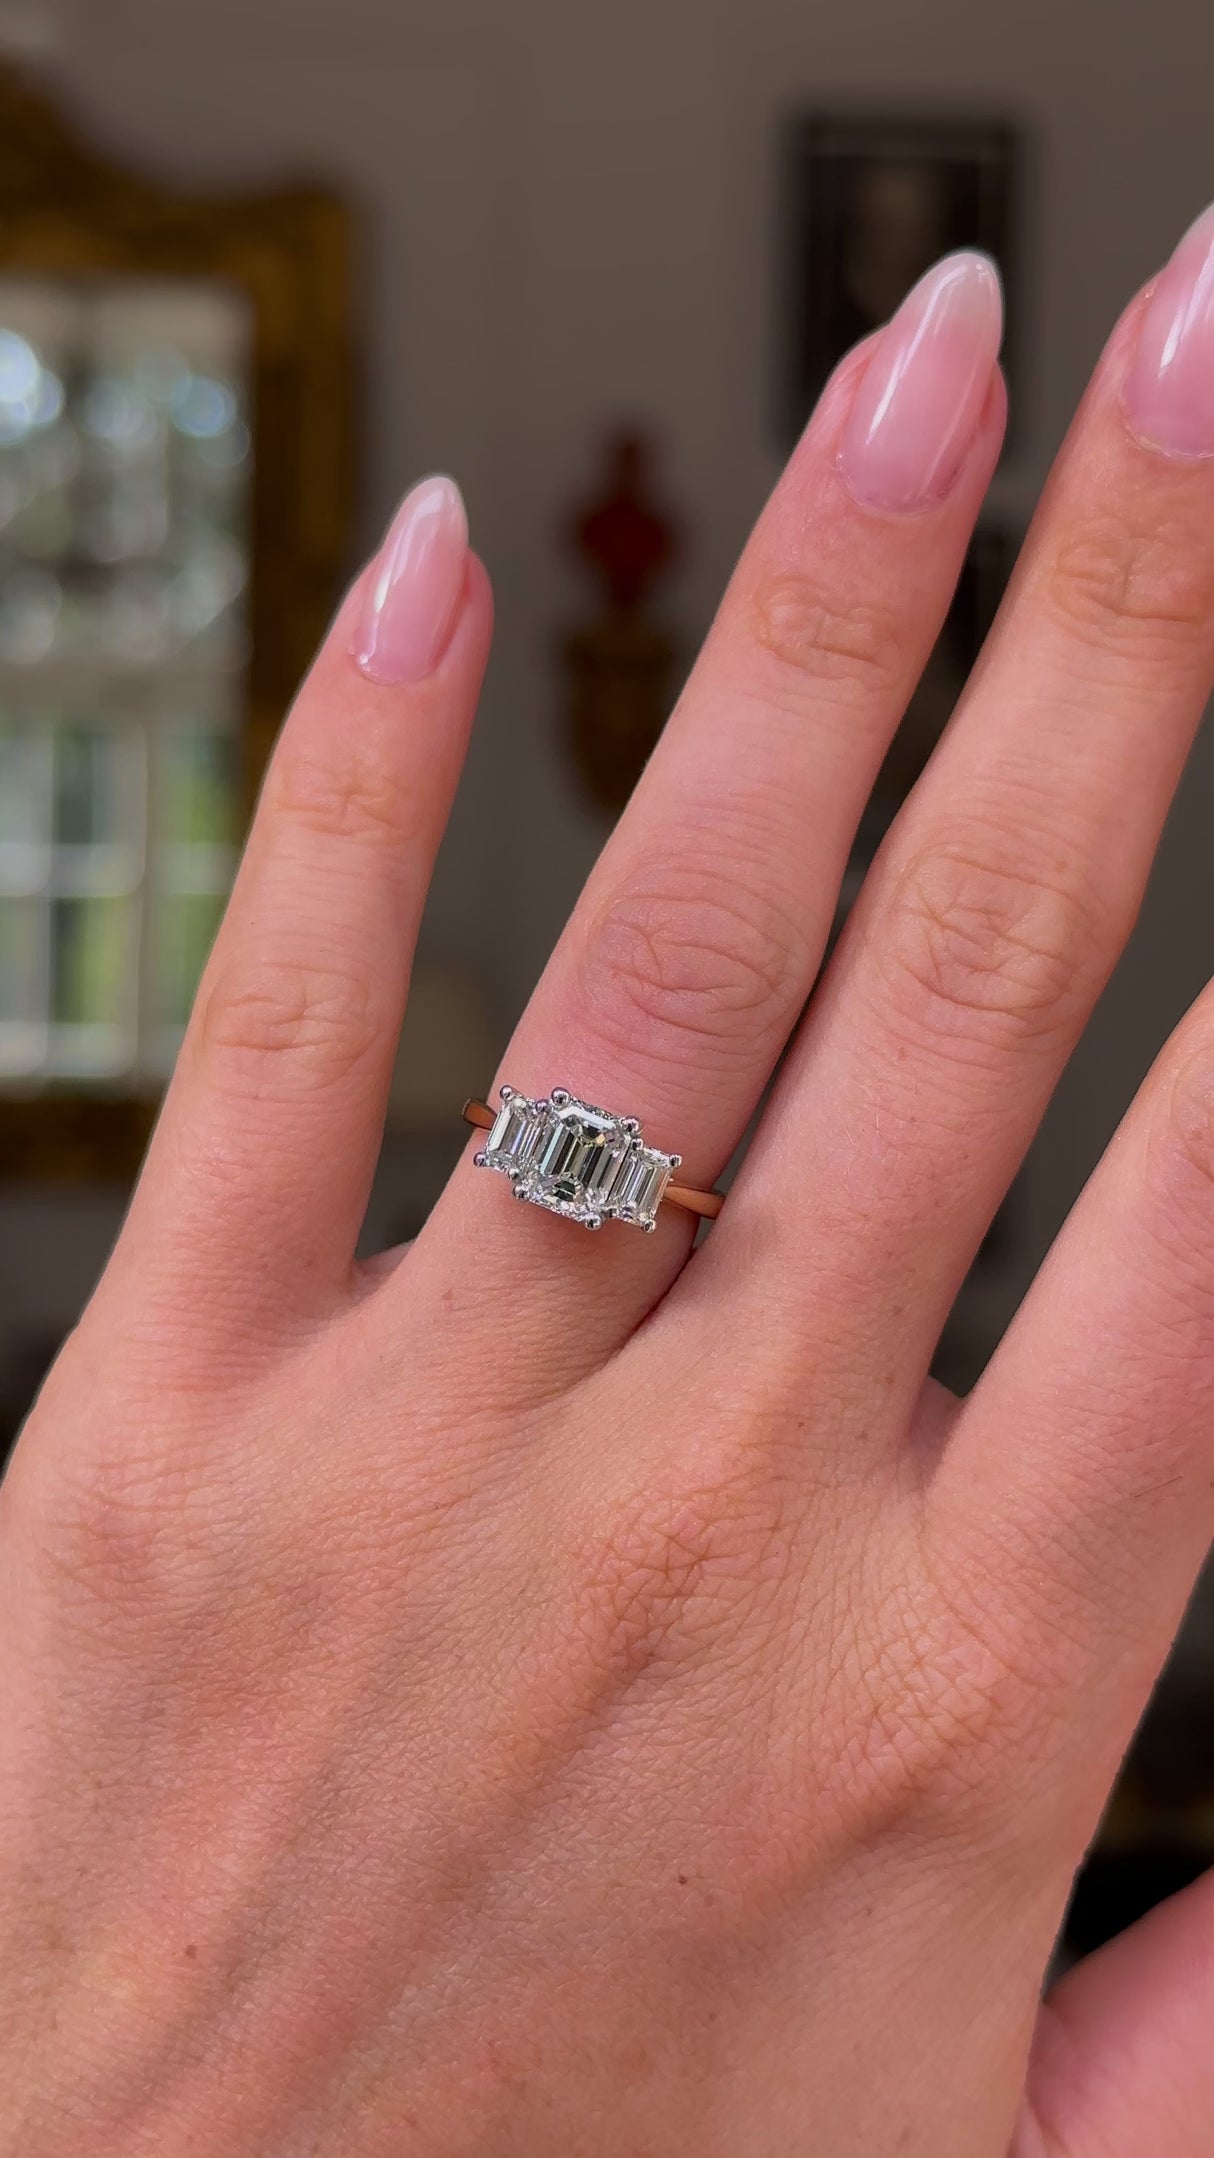 Three stone emerald-cut diamond ring, worn on left hand, ring finger. Hand moving away from lens, hot with antiquated bokeh background